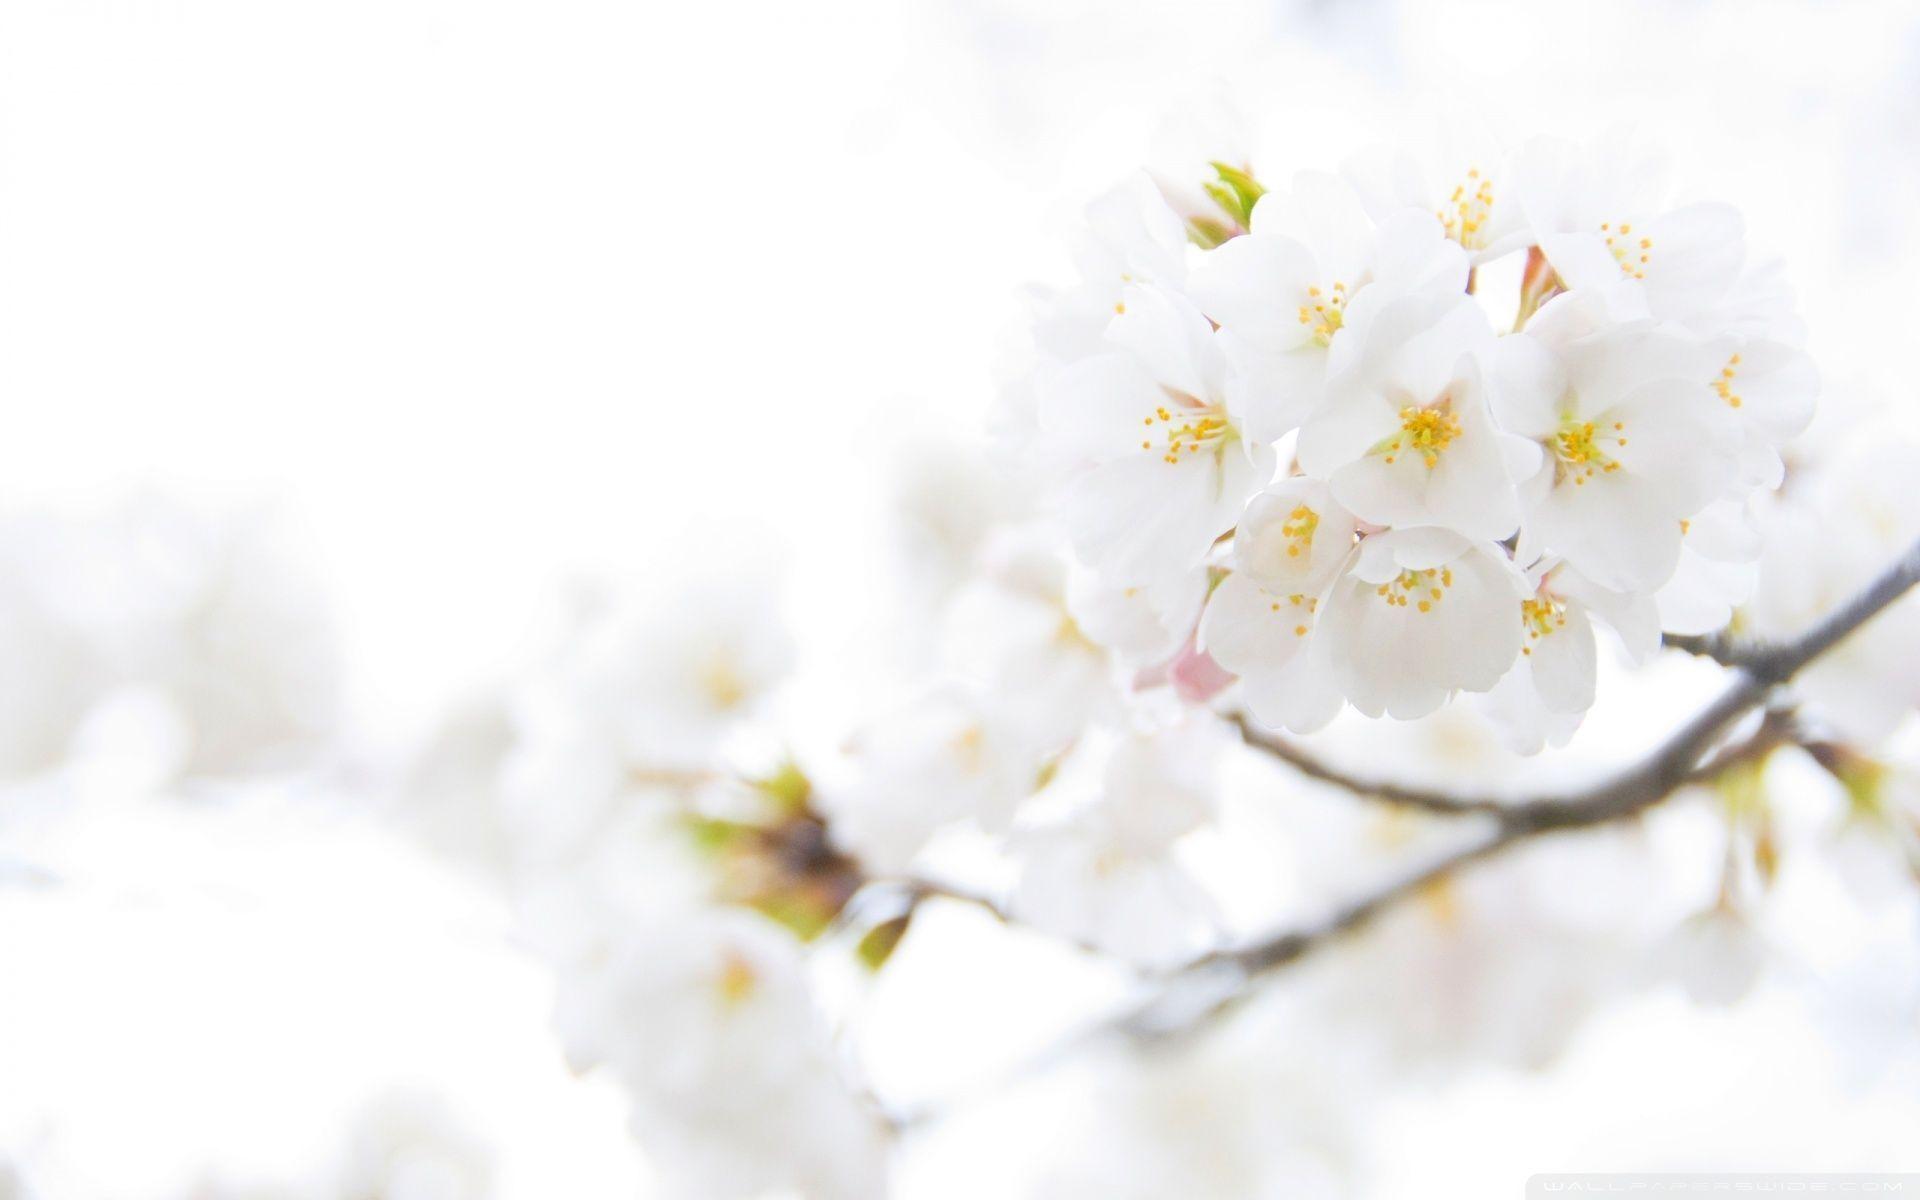 White Flower Wallpaper Hd Outlet, GET 56% OFF, 